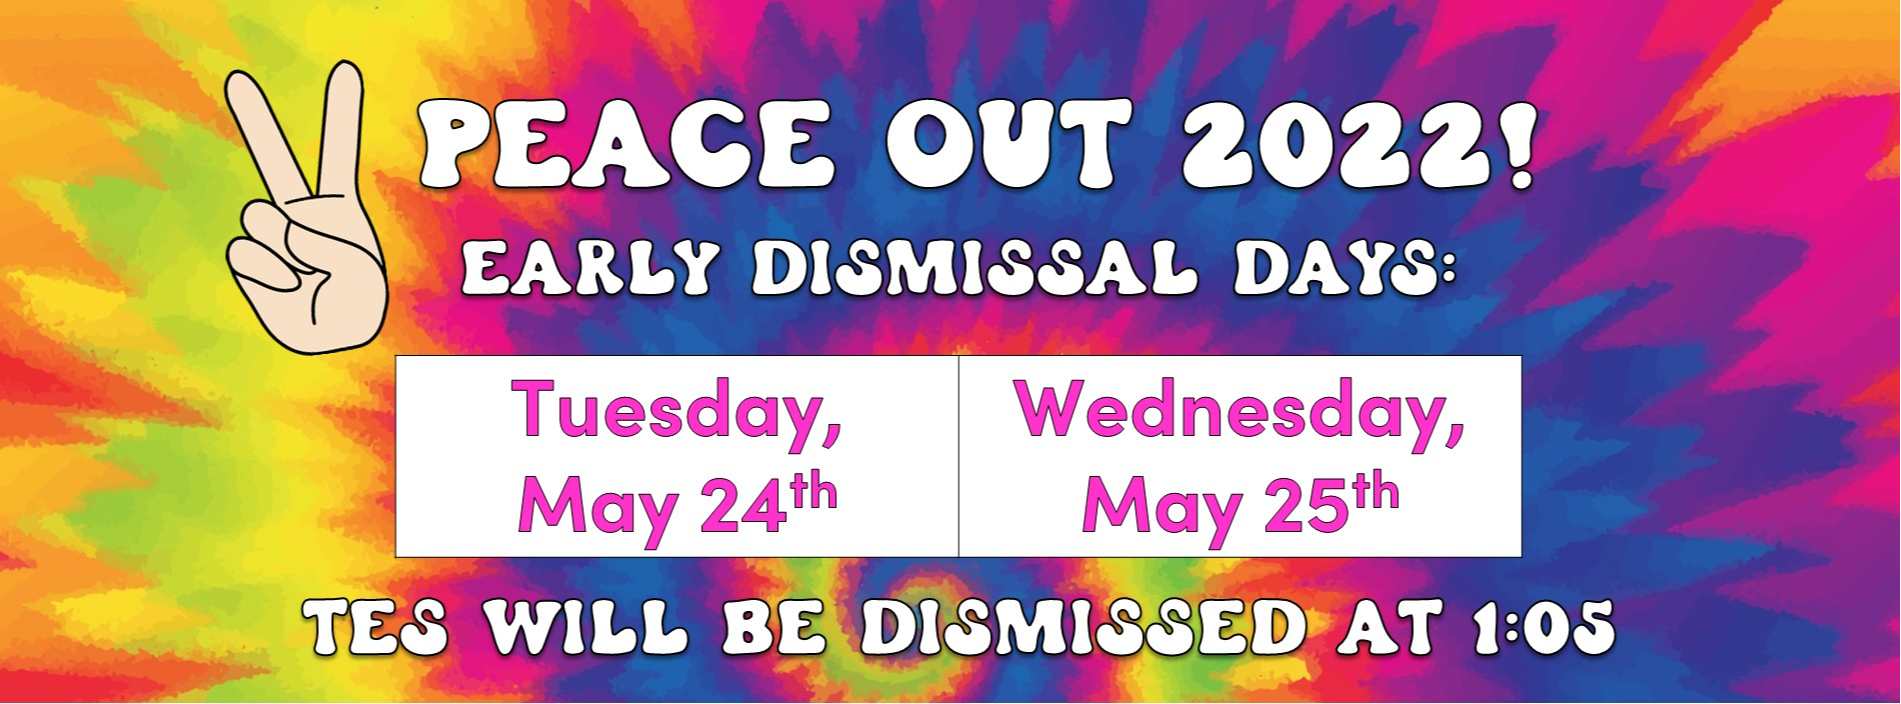 Peace out 2022! Early dismissal days: Tuesday, May 24th and Wednesday May 25th @1:05